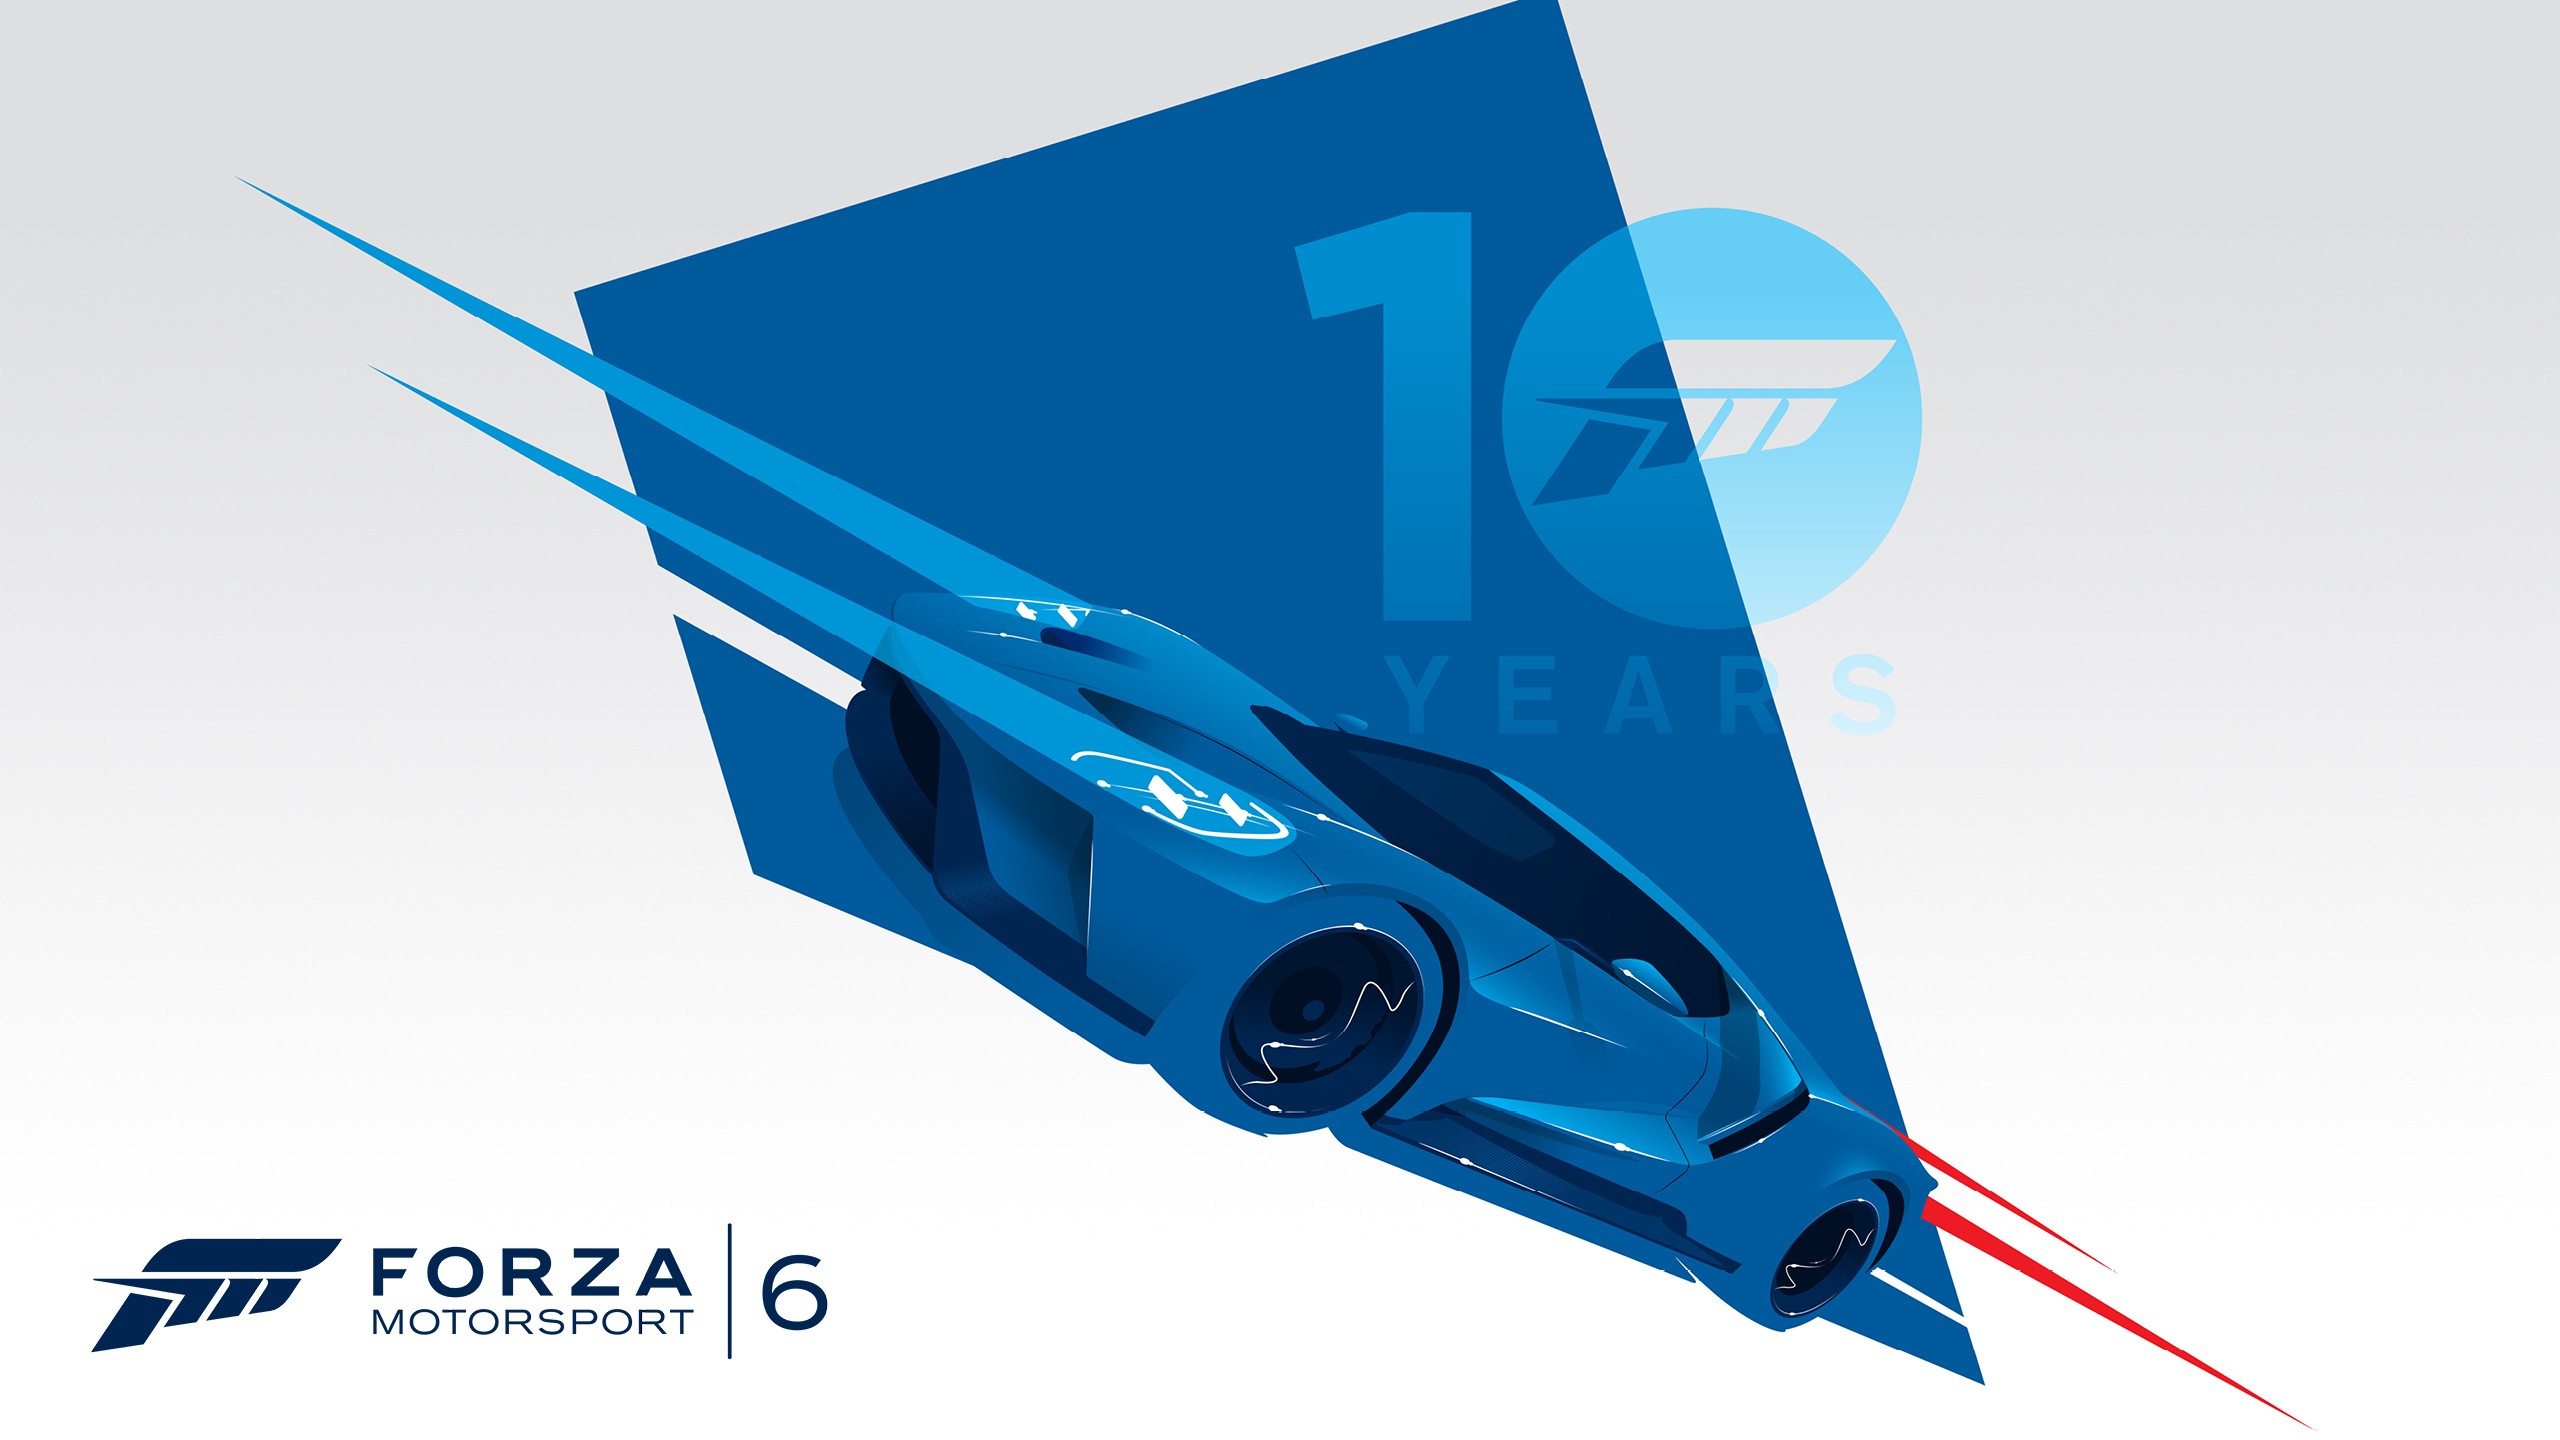 Video Game Forza Motorsport 6 HD Wallpaper | Background Image